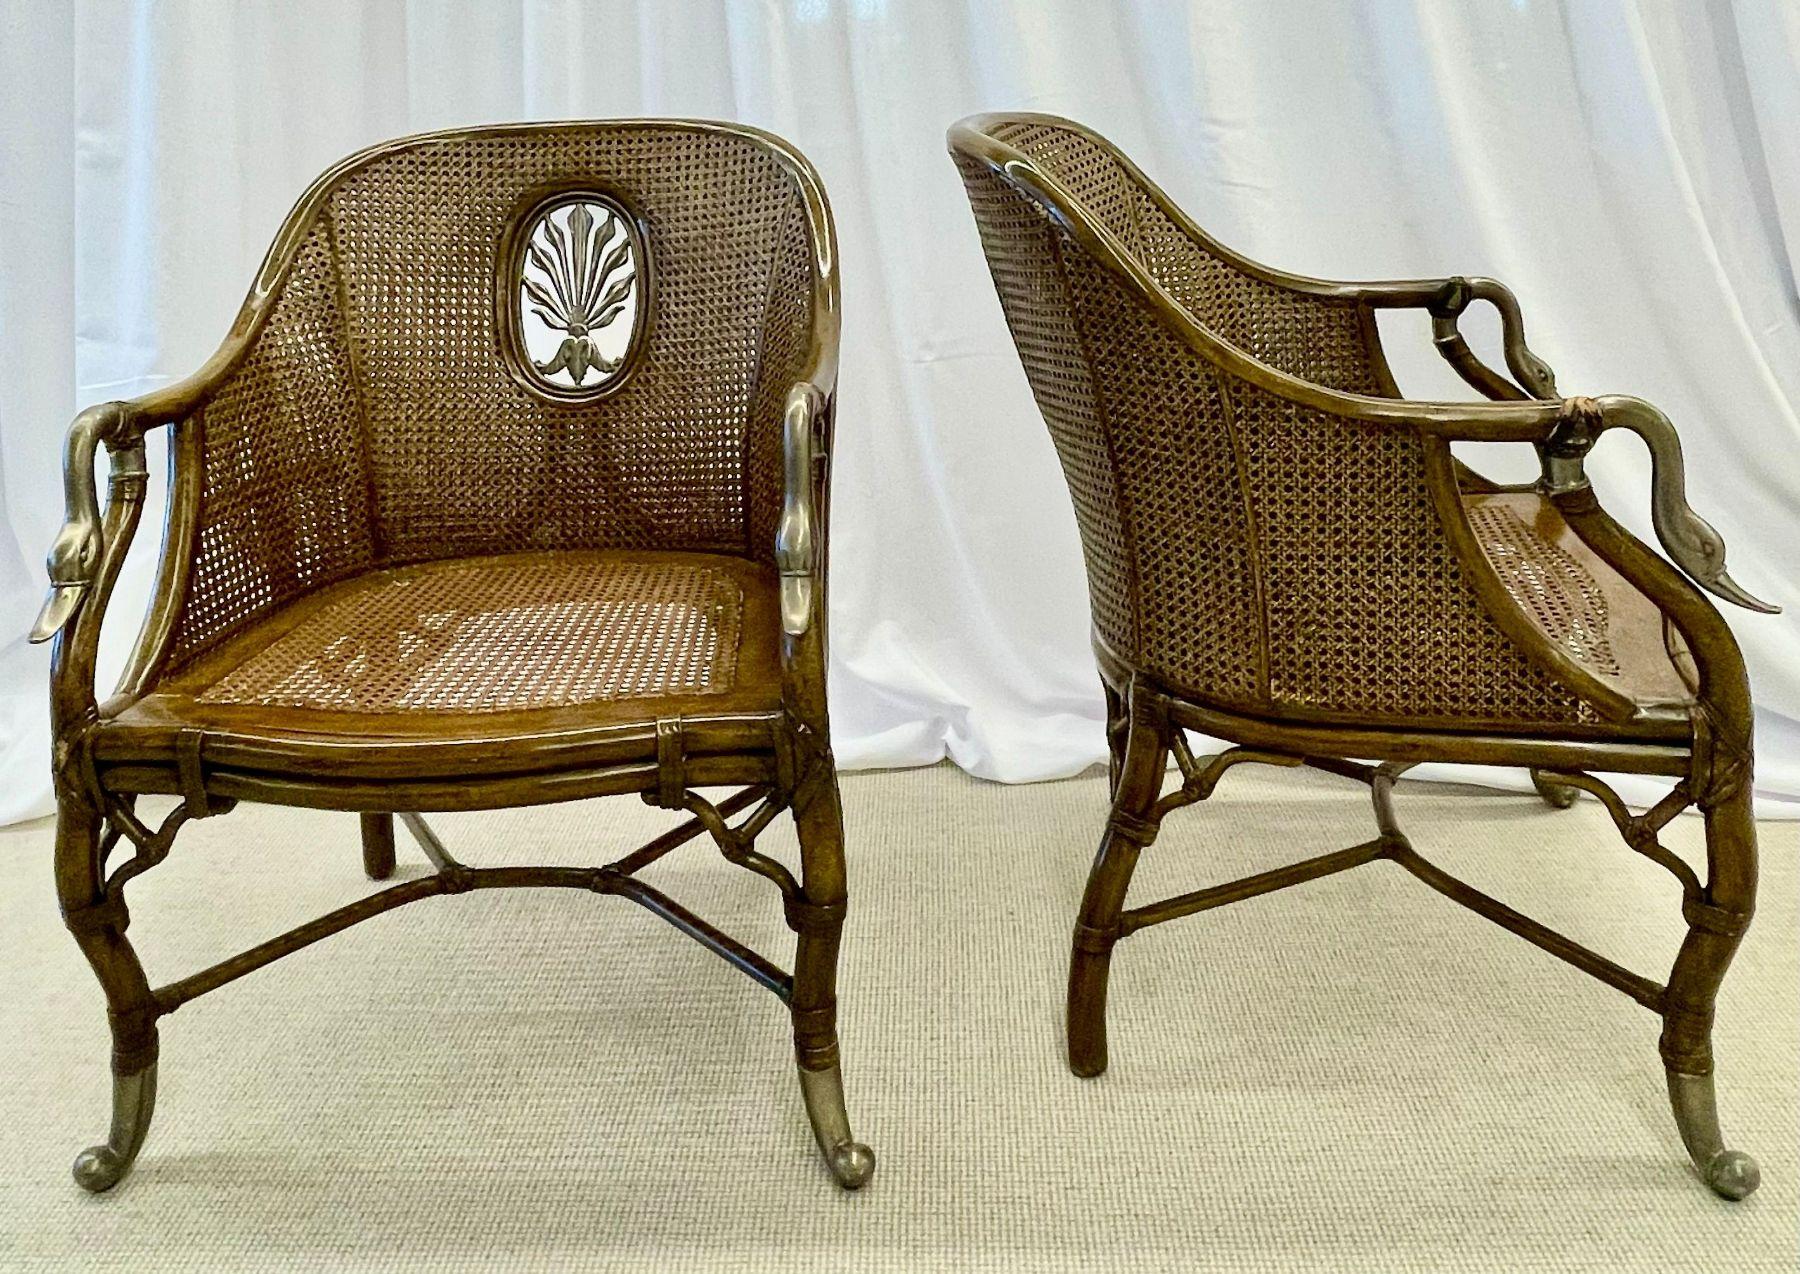 Mid-20th Century French Design, Arm Chairs, Tortoise, Brown Cane, Silver, France, 1950s For Sale